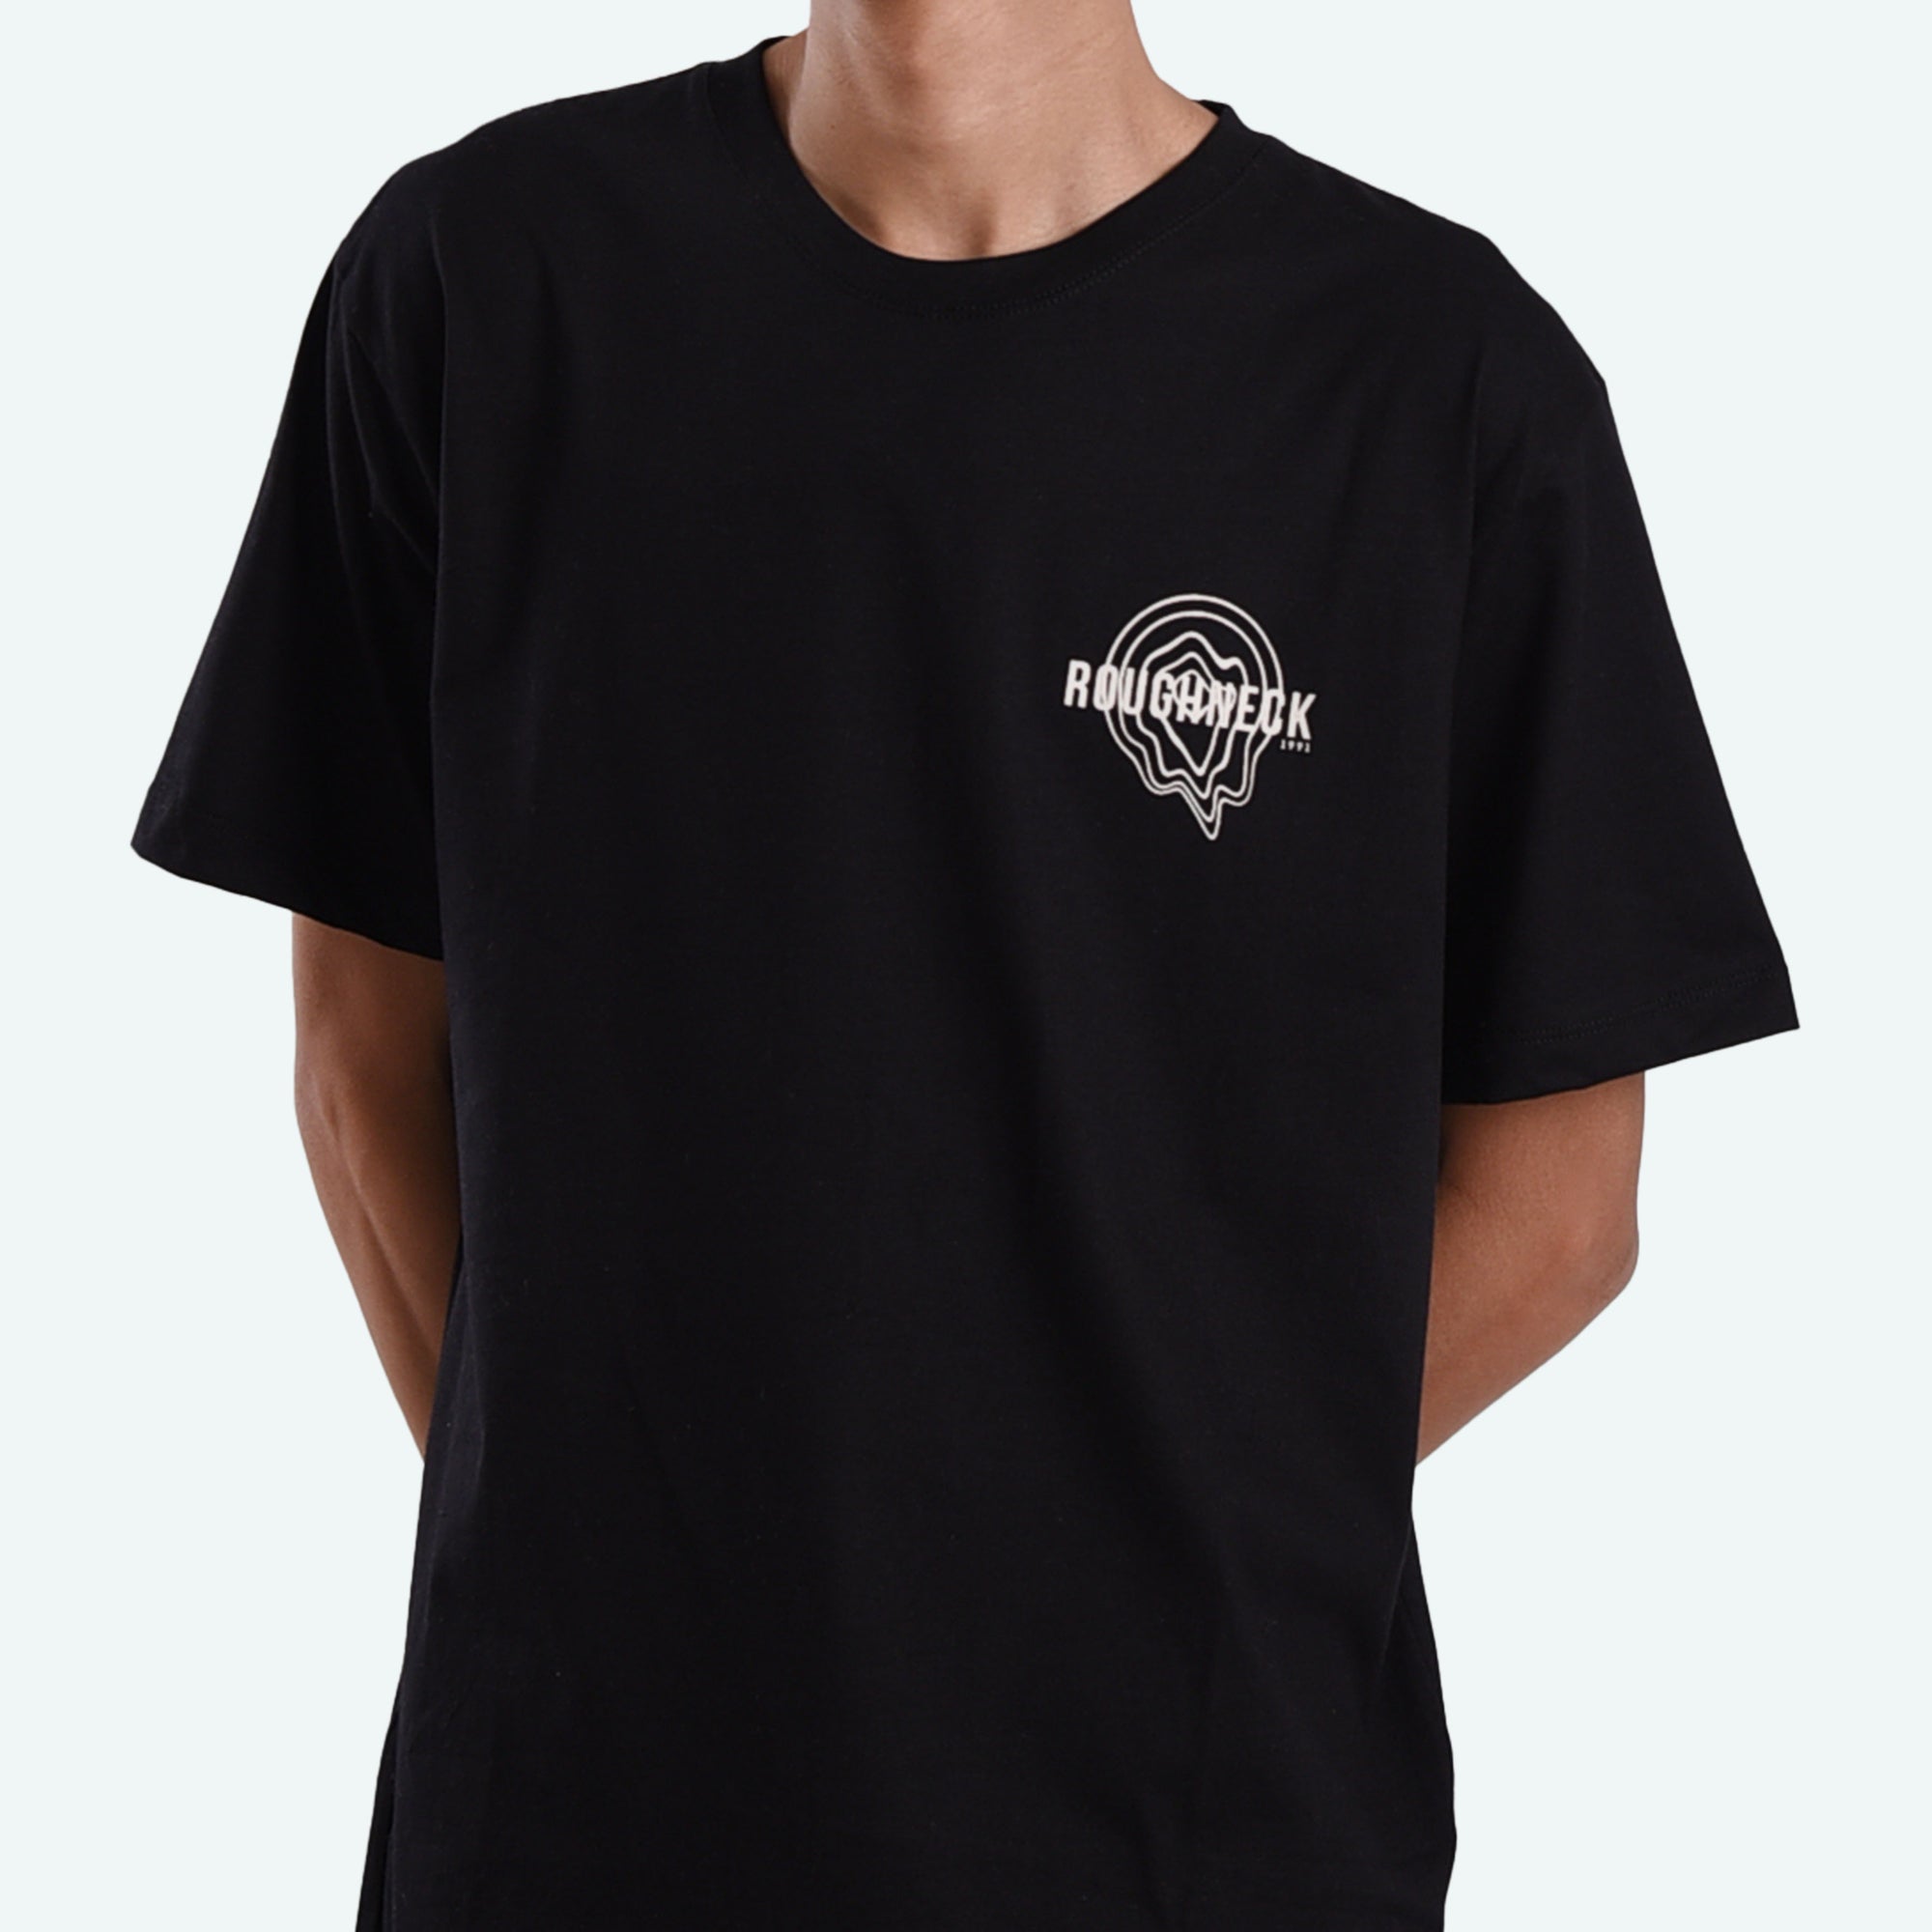 T430 Black Note the Place Tshirt